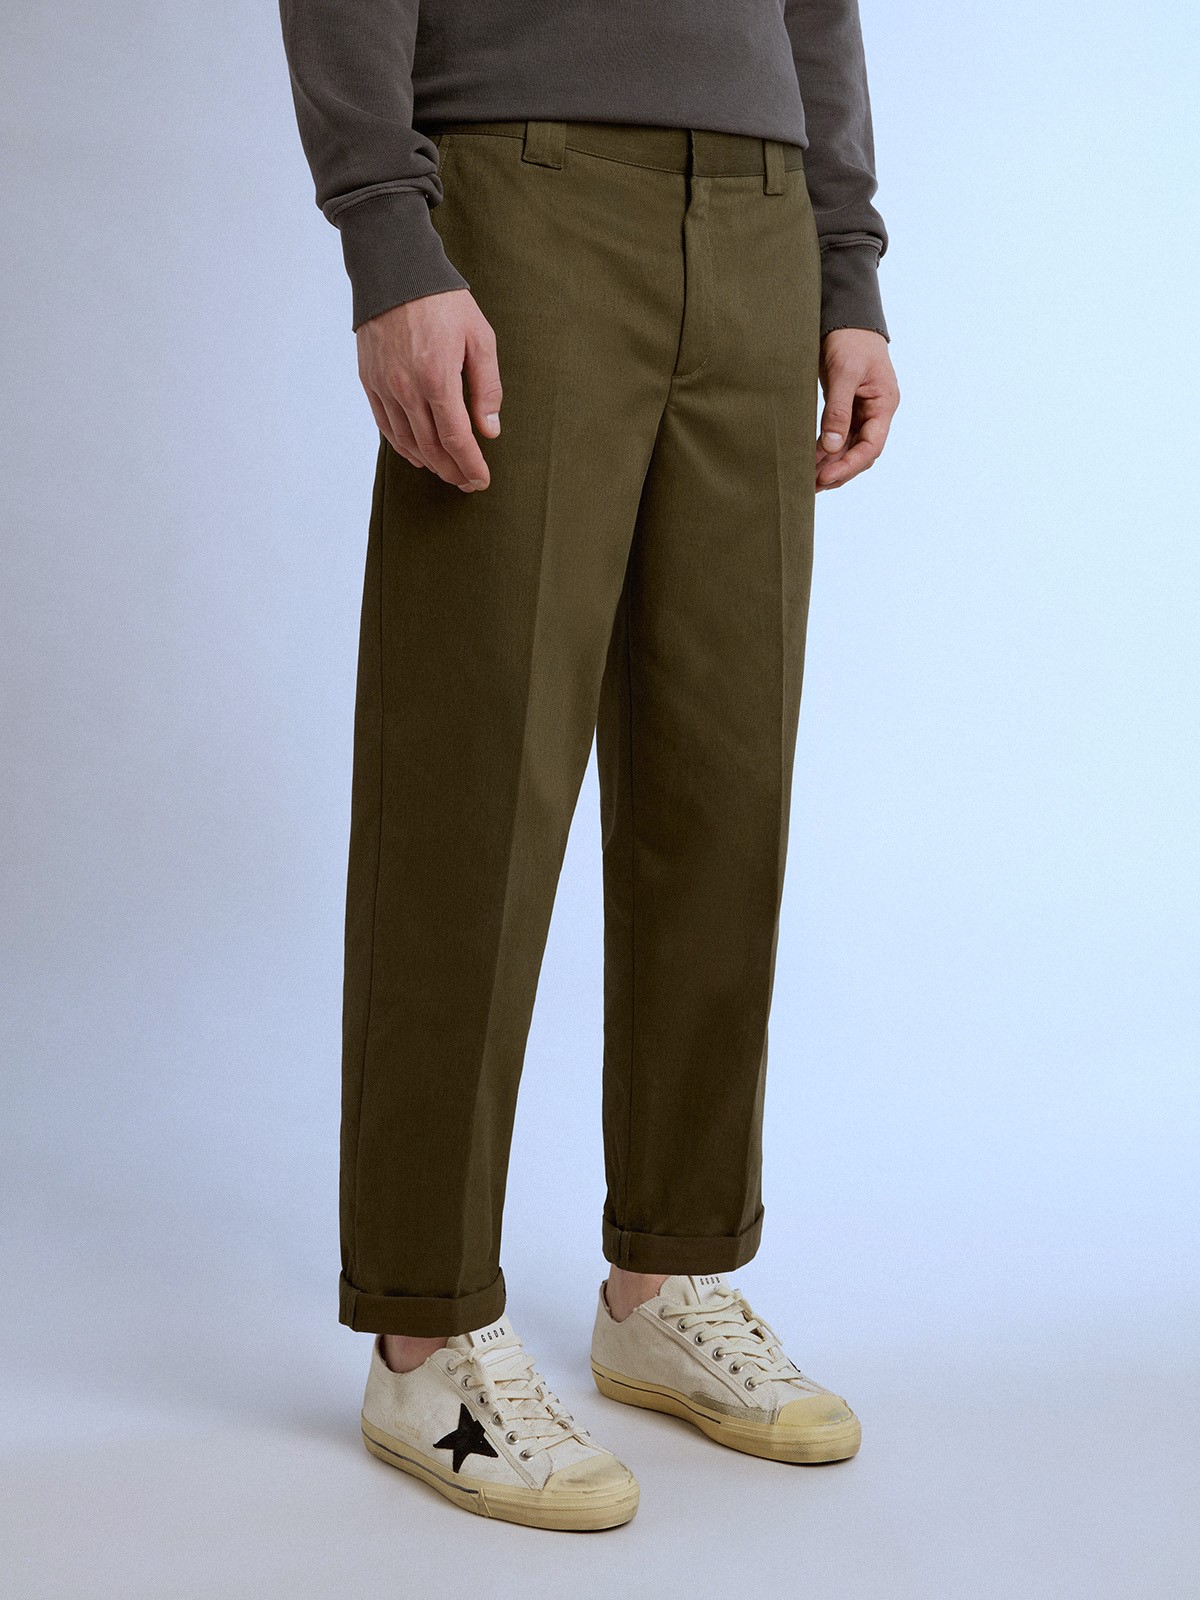 GOLDEN GOOSE Chino Skate Pants in Olive 46